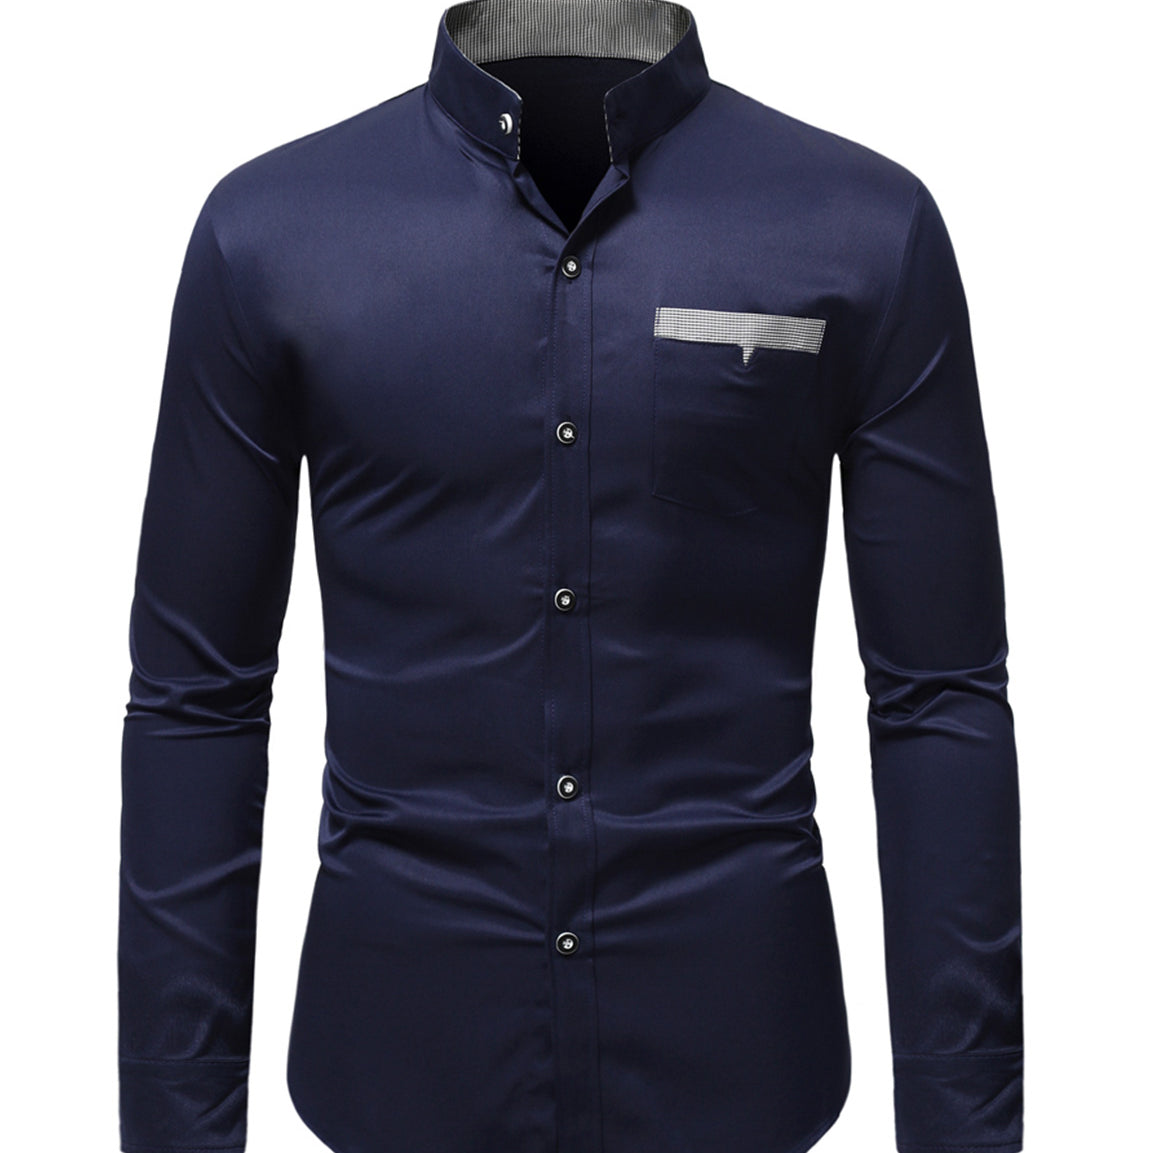 Men's Stand Collar Solid Pocket Button Up Long Sleeve Shirt